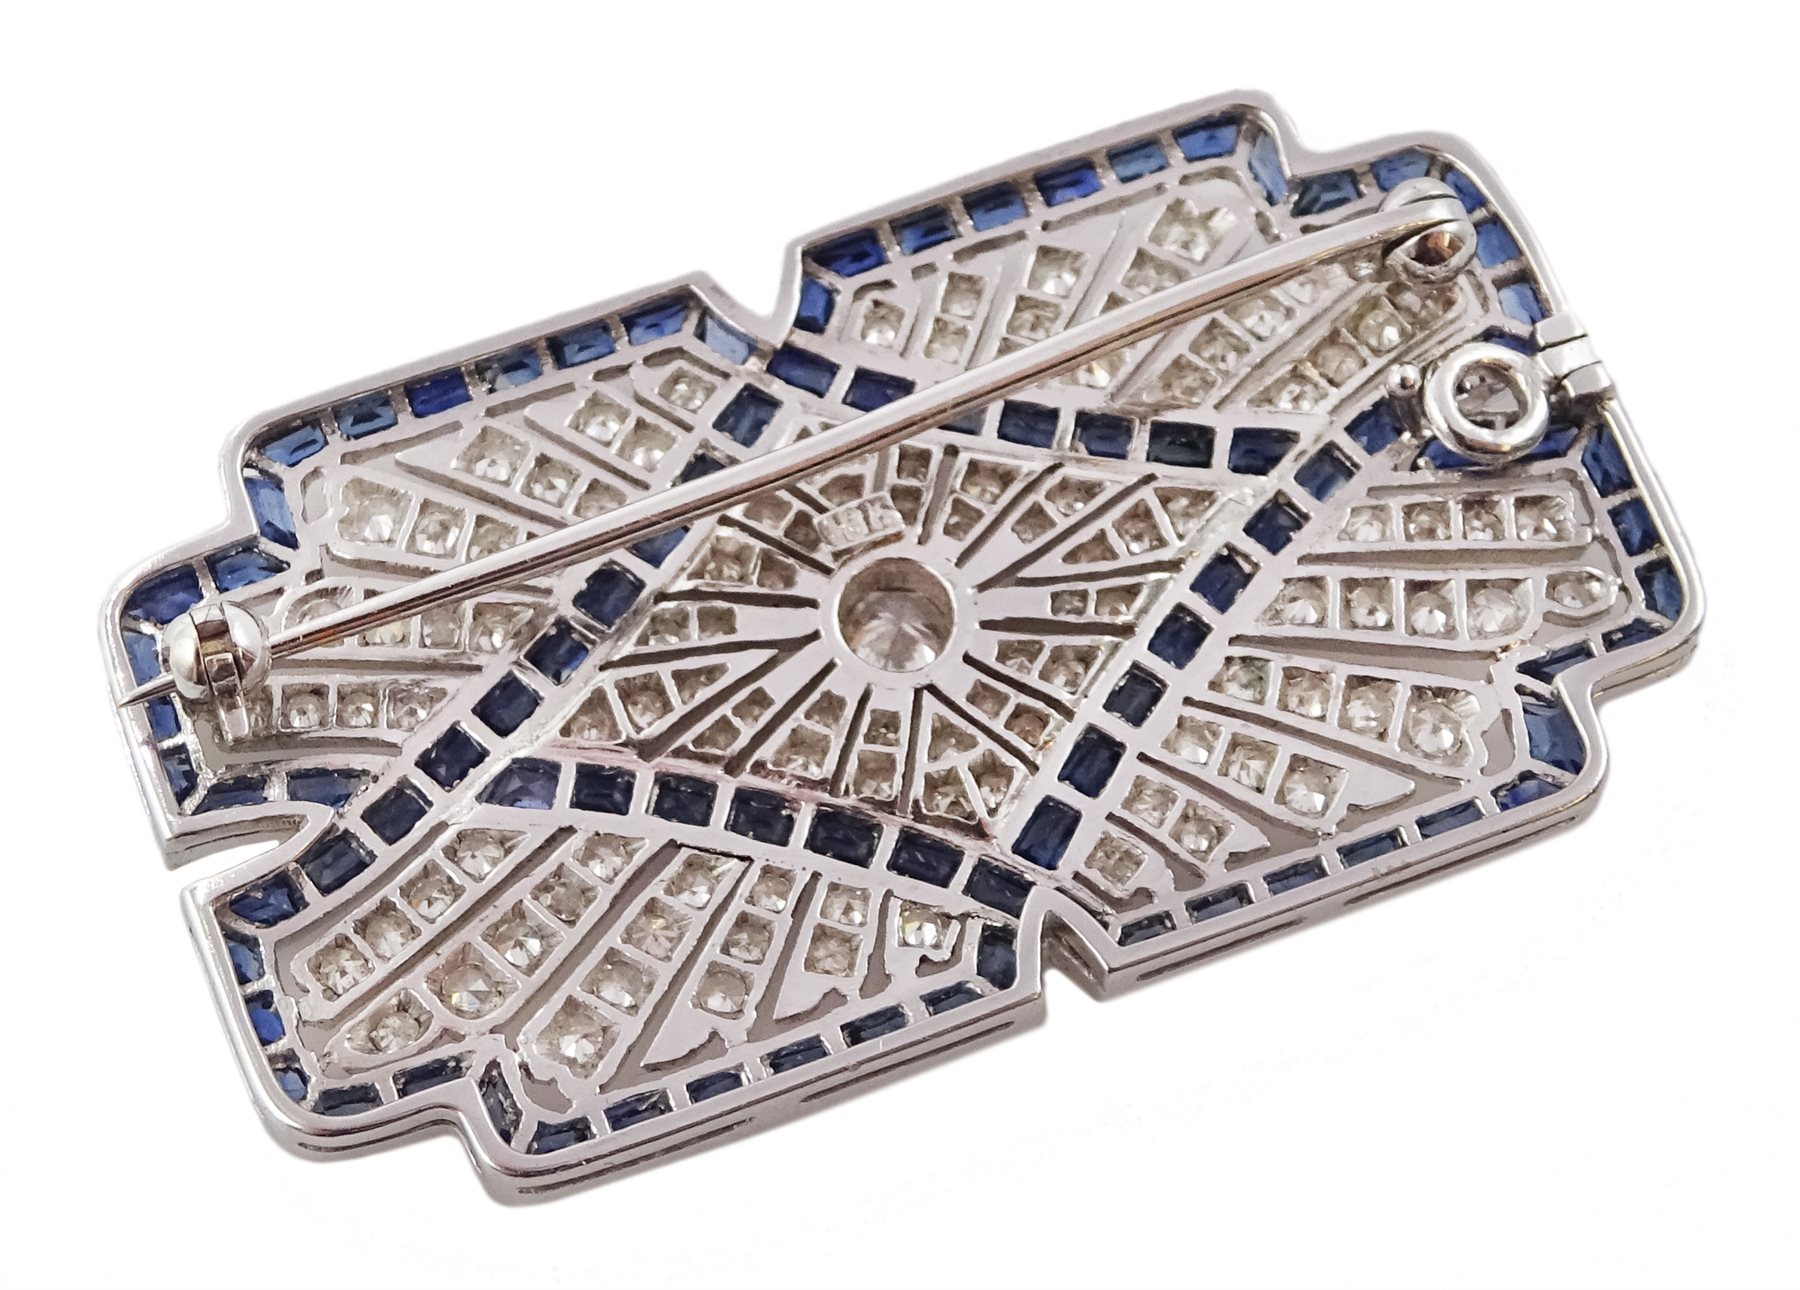 White gold calibre cut sapphire and diamond brooch, milgrain set in open work design, stamped 18K - Image 3 of 4